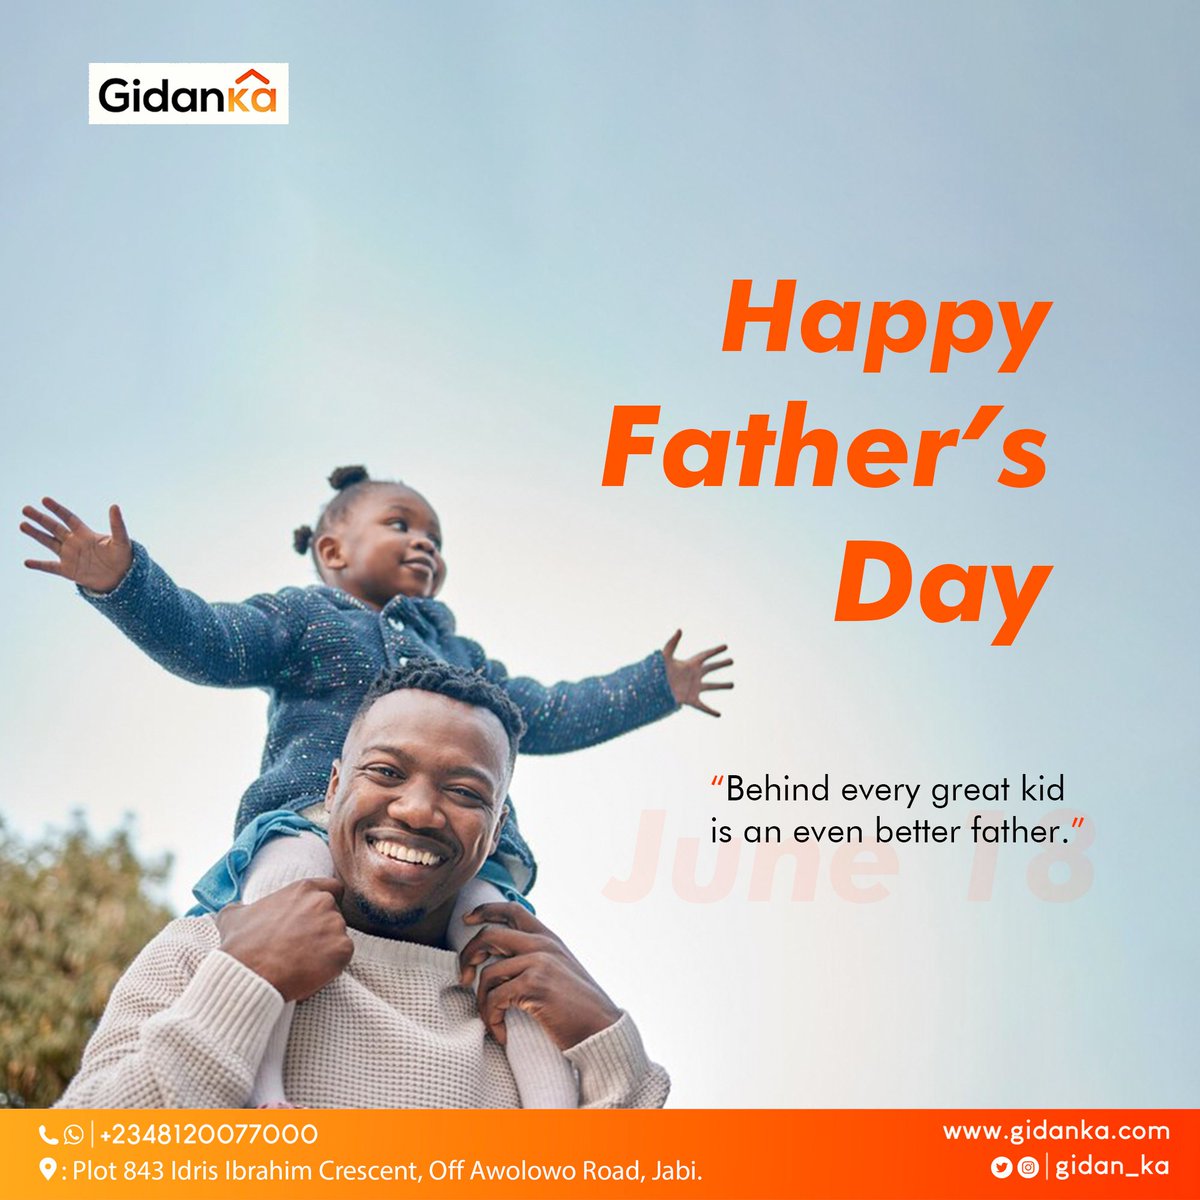 Happy father's Day to all the great dads out there. Thank you for your unwavering support, love, sacrifice and encouragement.

#superdads #gidanka #SmartResidences #homeawayfromhome #abujabusiness #fathersdaylove